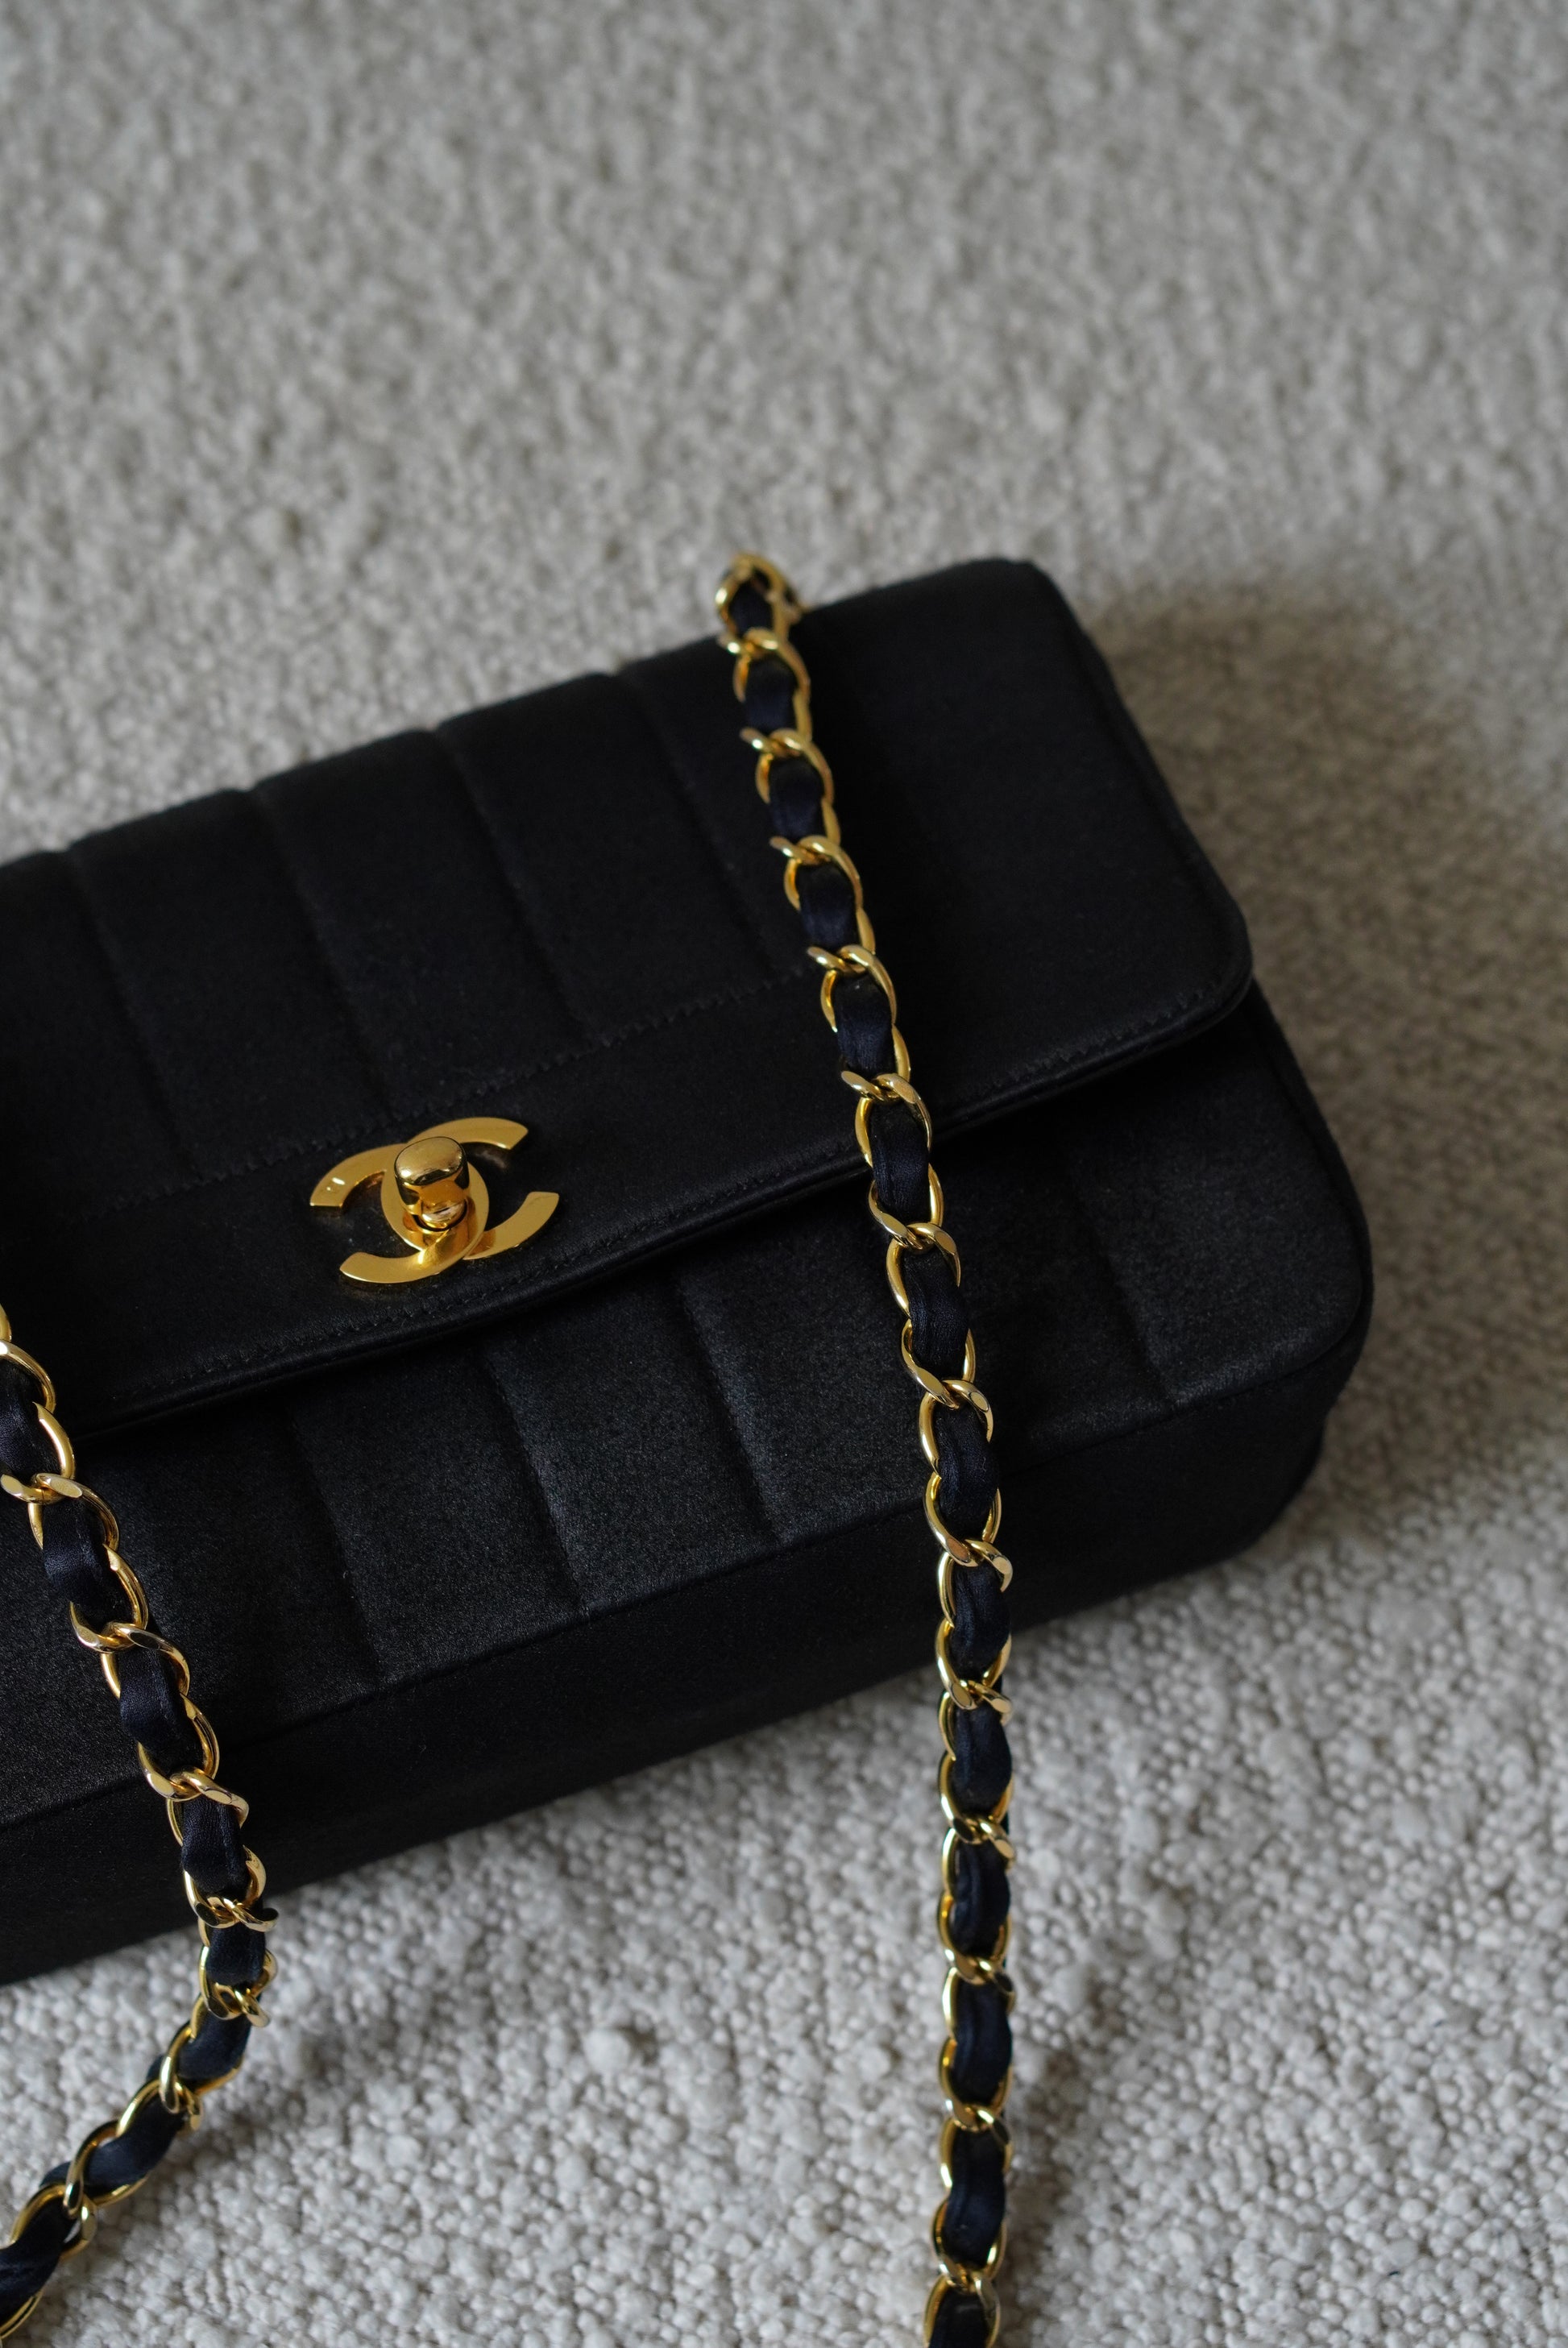 chanel black and gold purse clutch